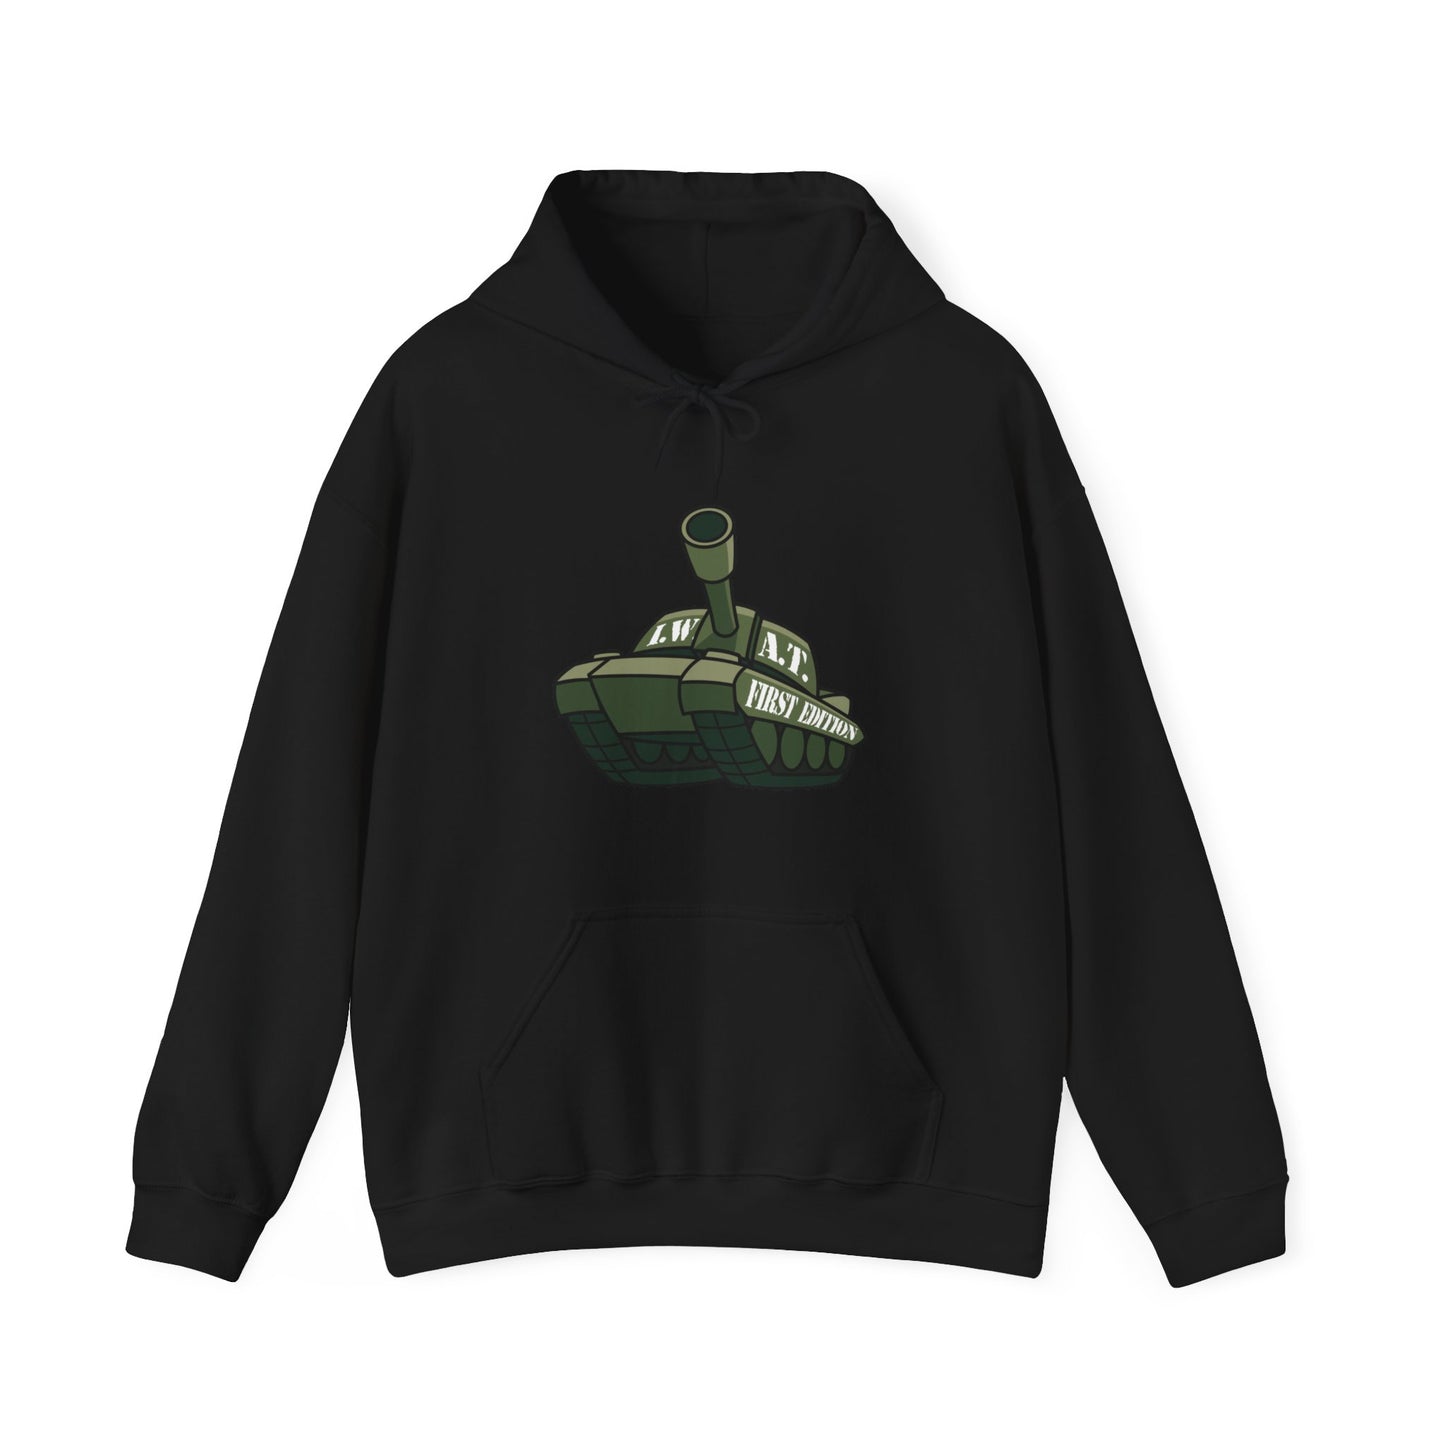 First Edition Hoodie